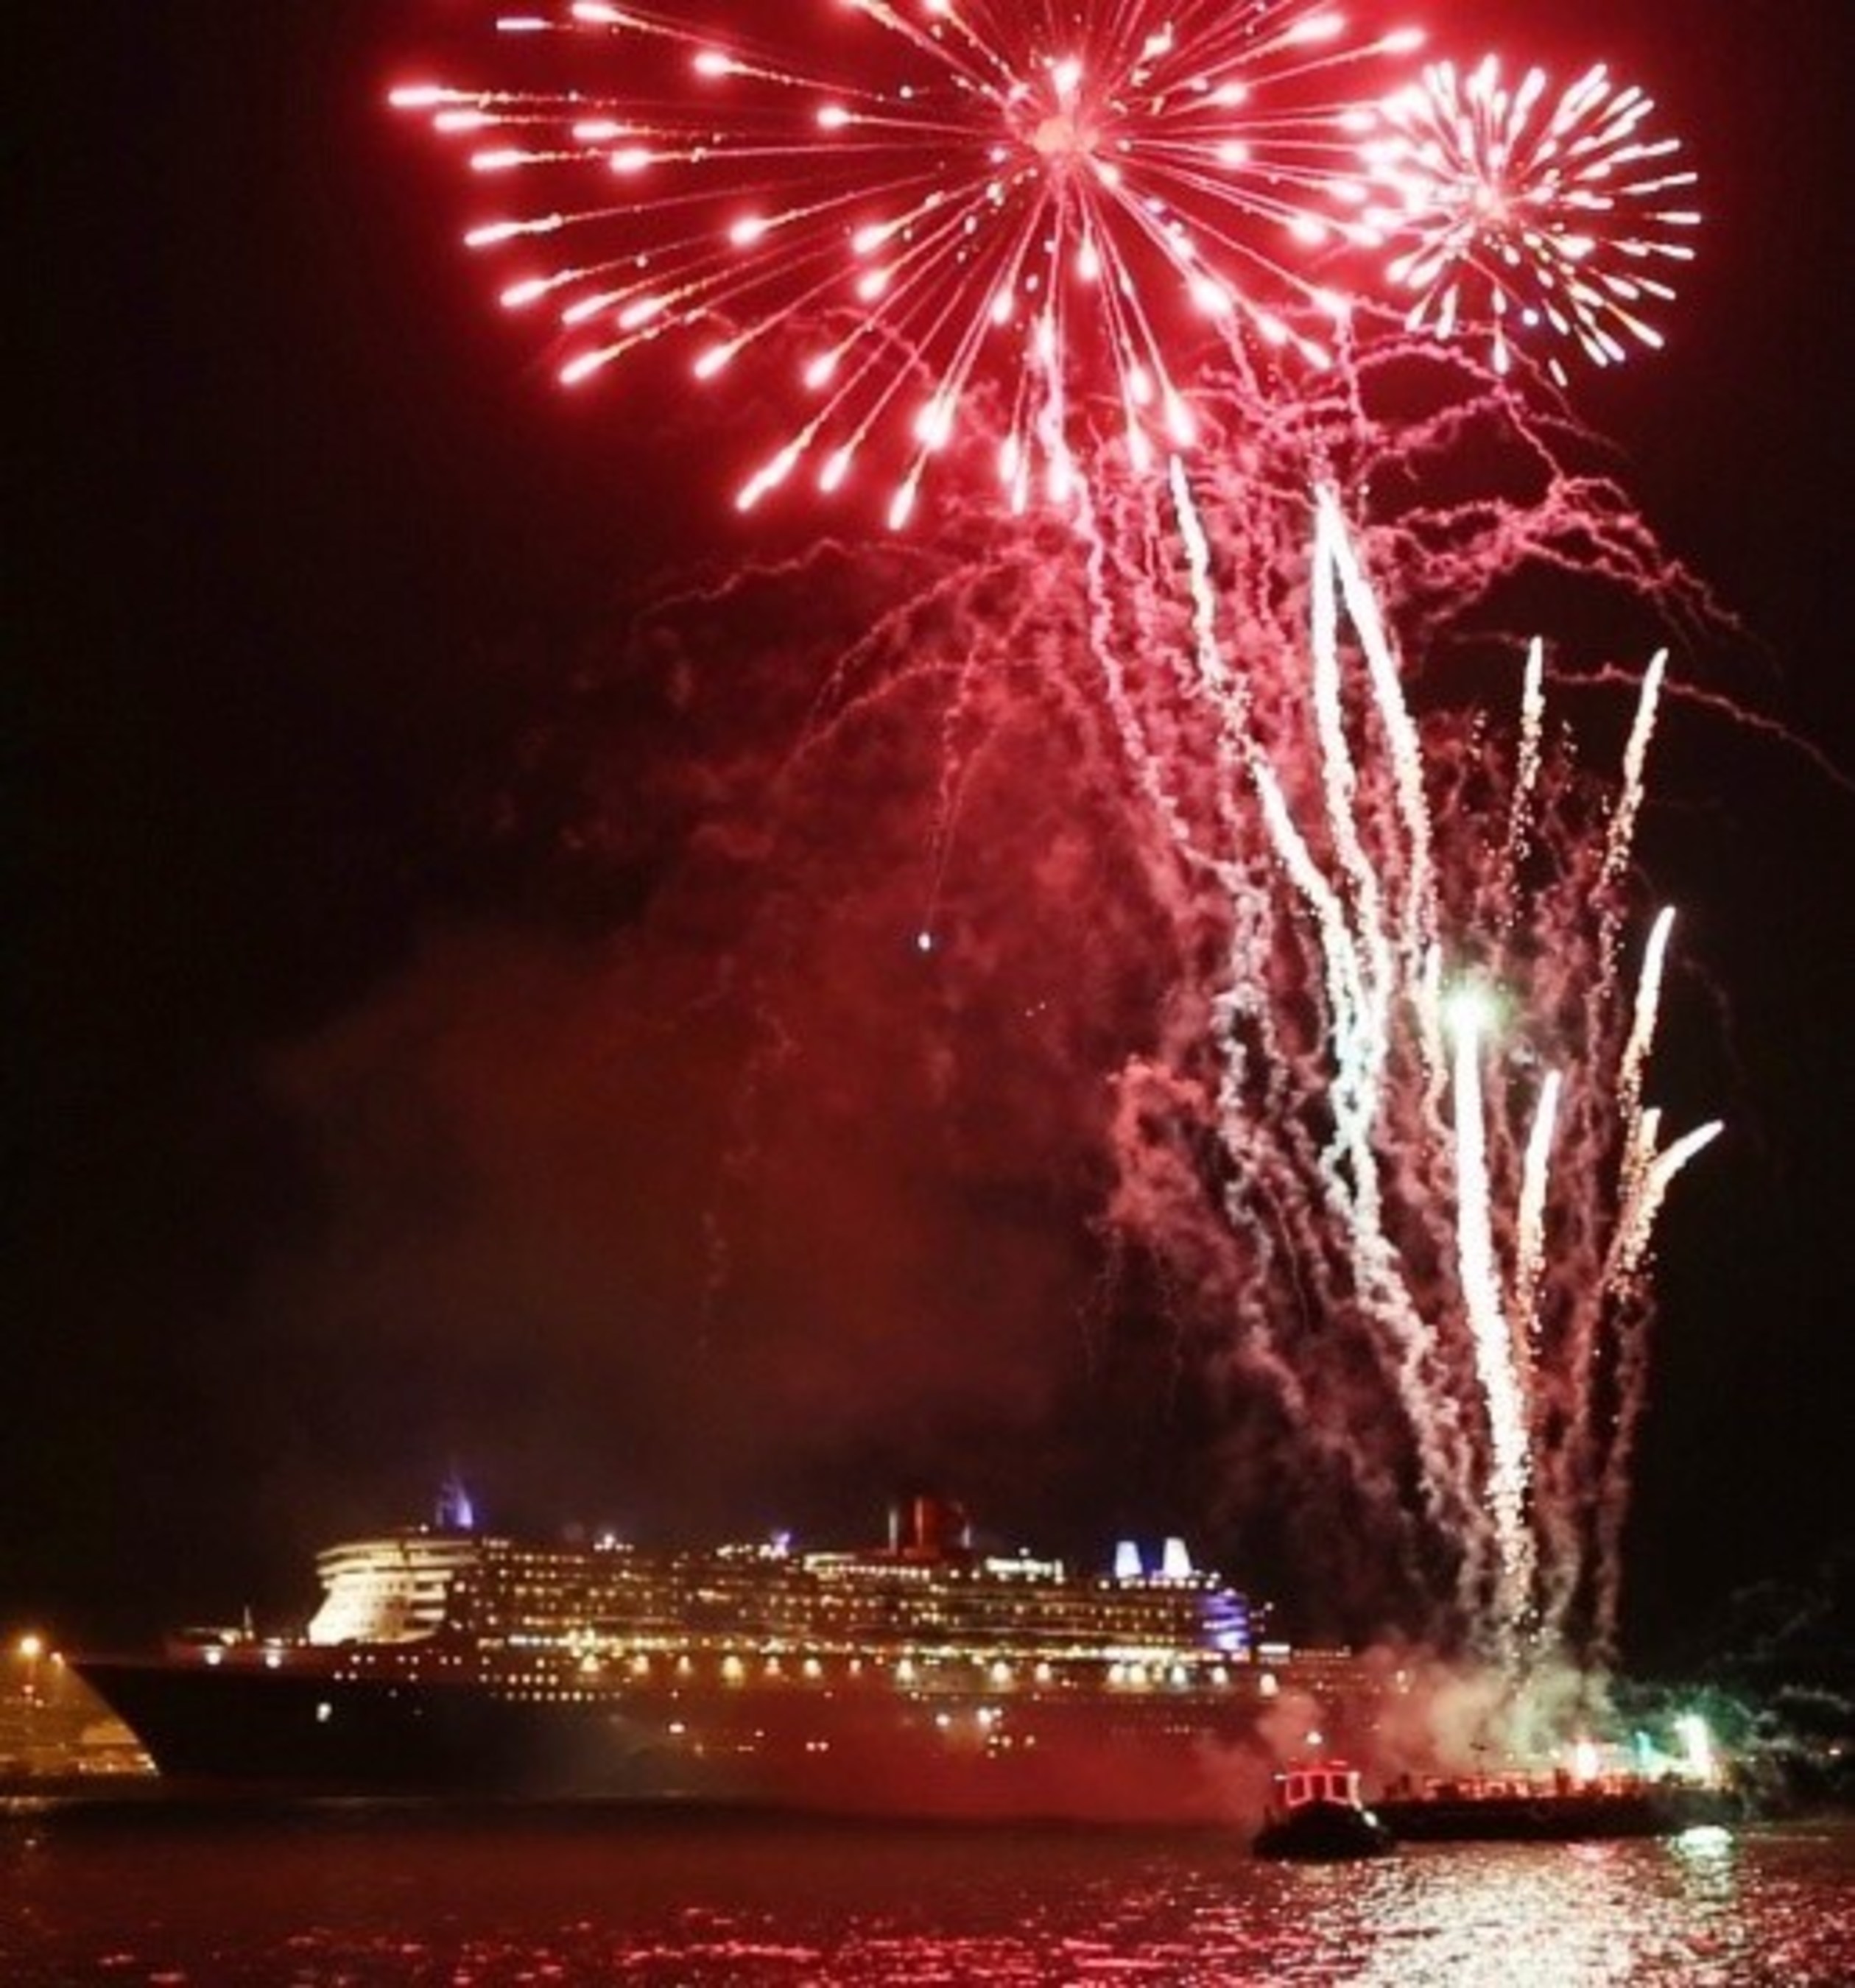 Fireworks added a festive celebration to flagship Queen Mary 2's World Voyage departure from Southampton on 10 January